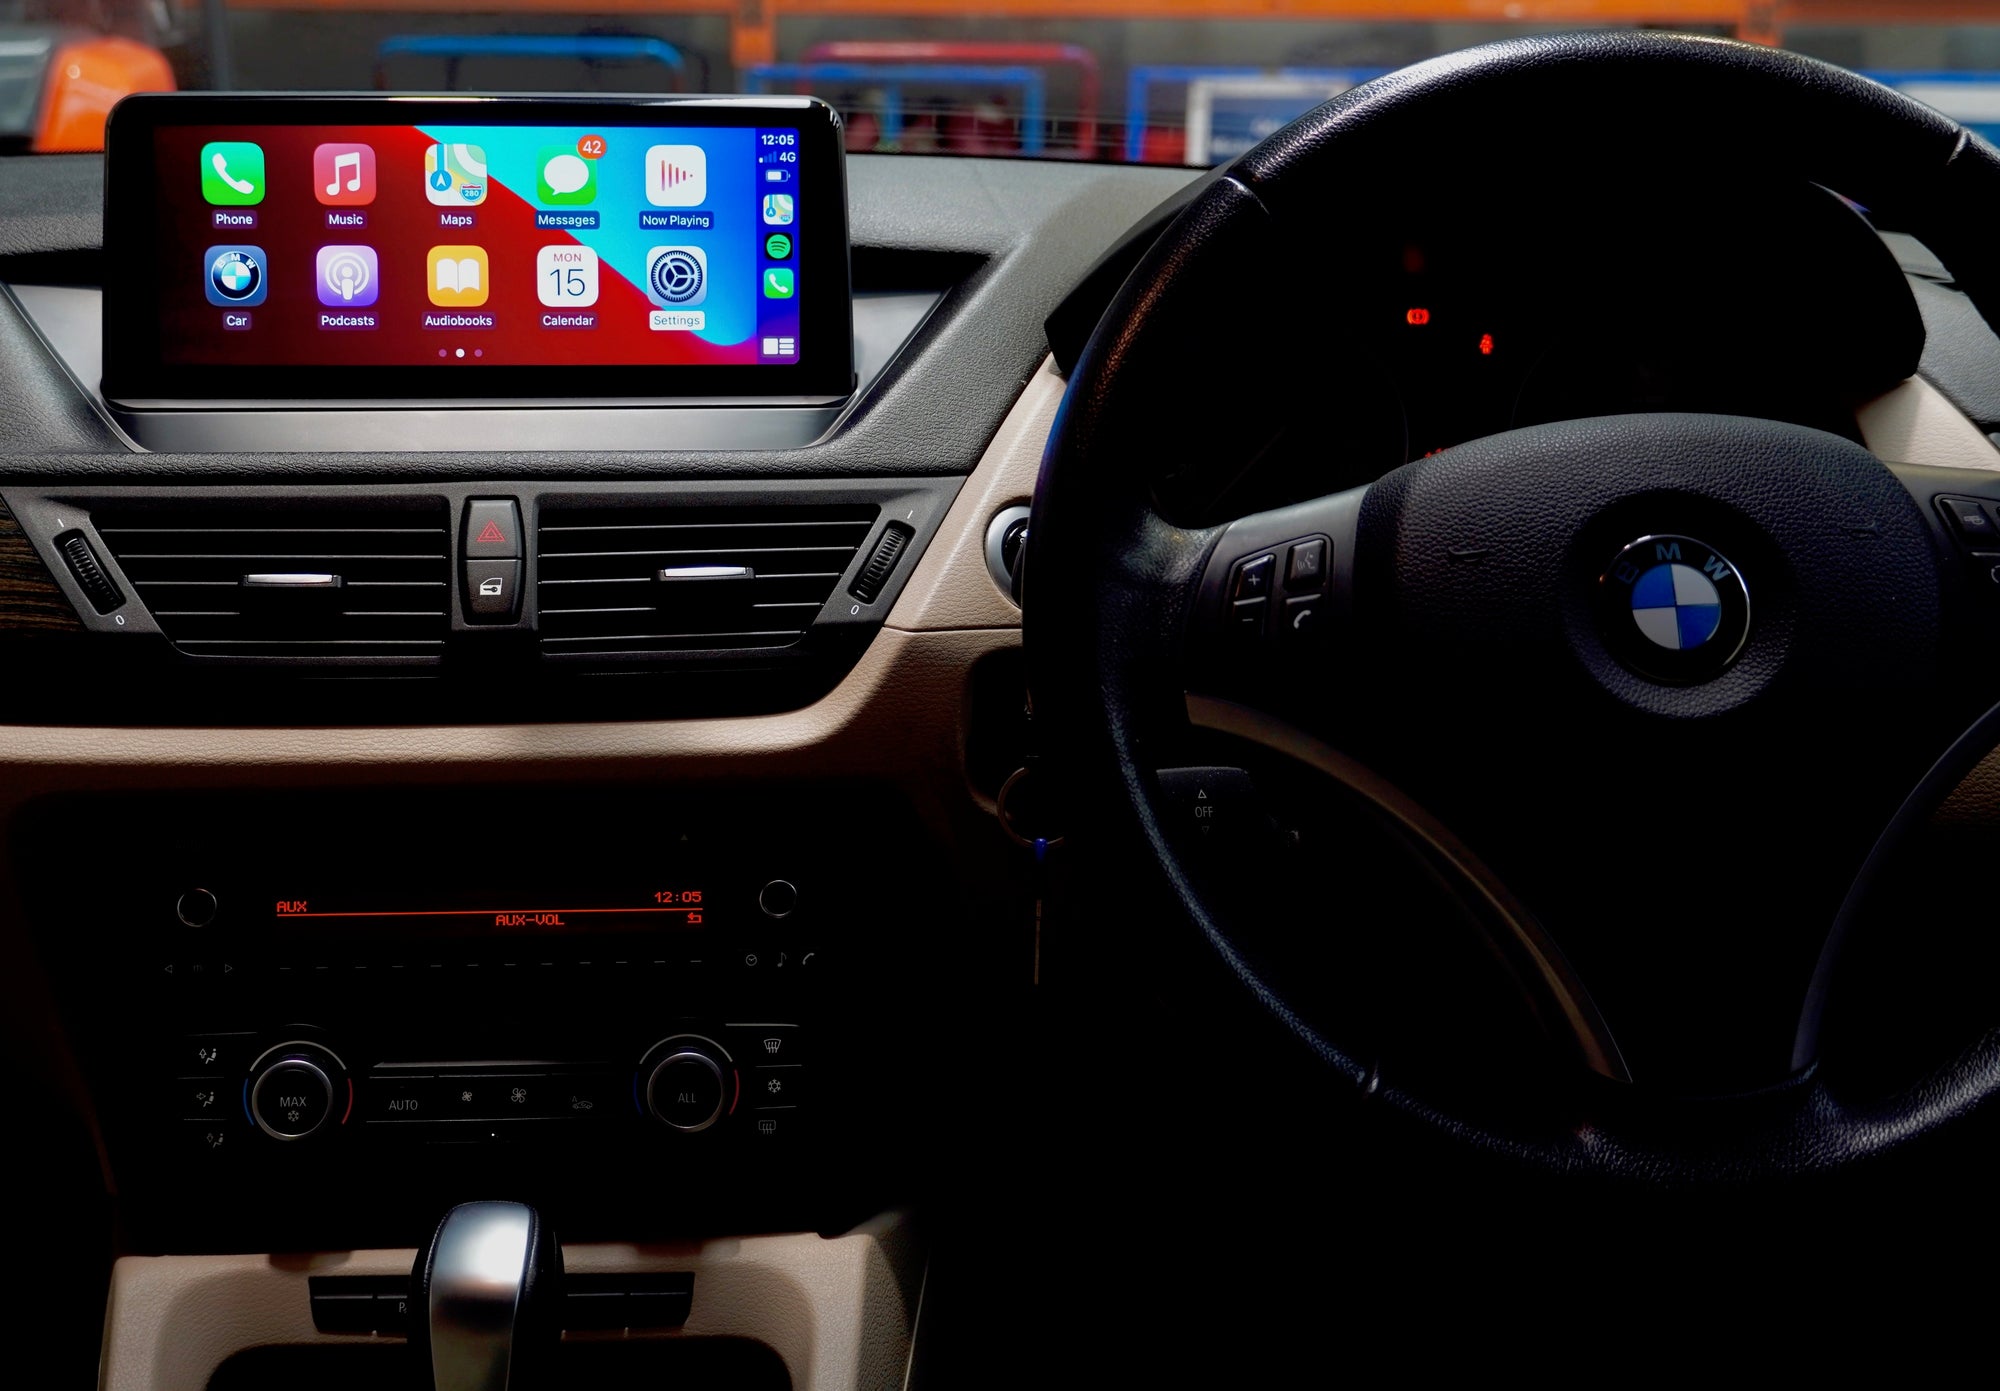 BMW X1 10.25" Android Display.